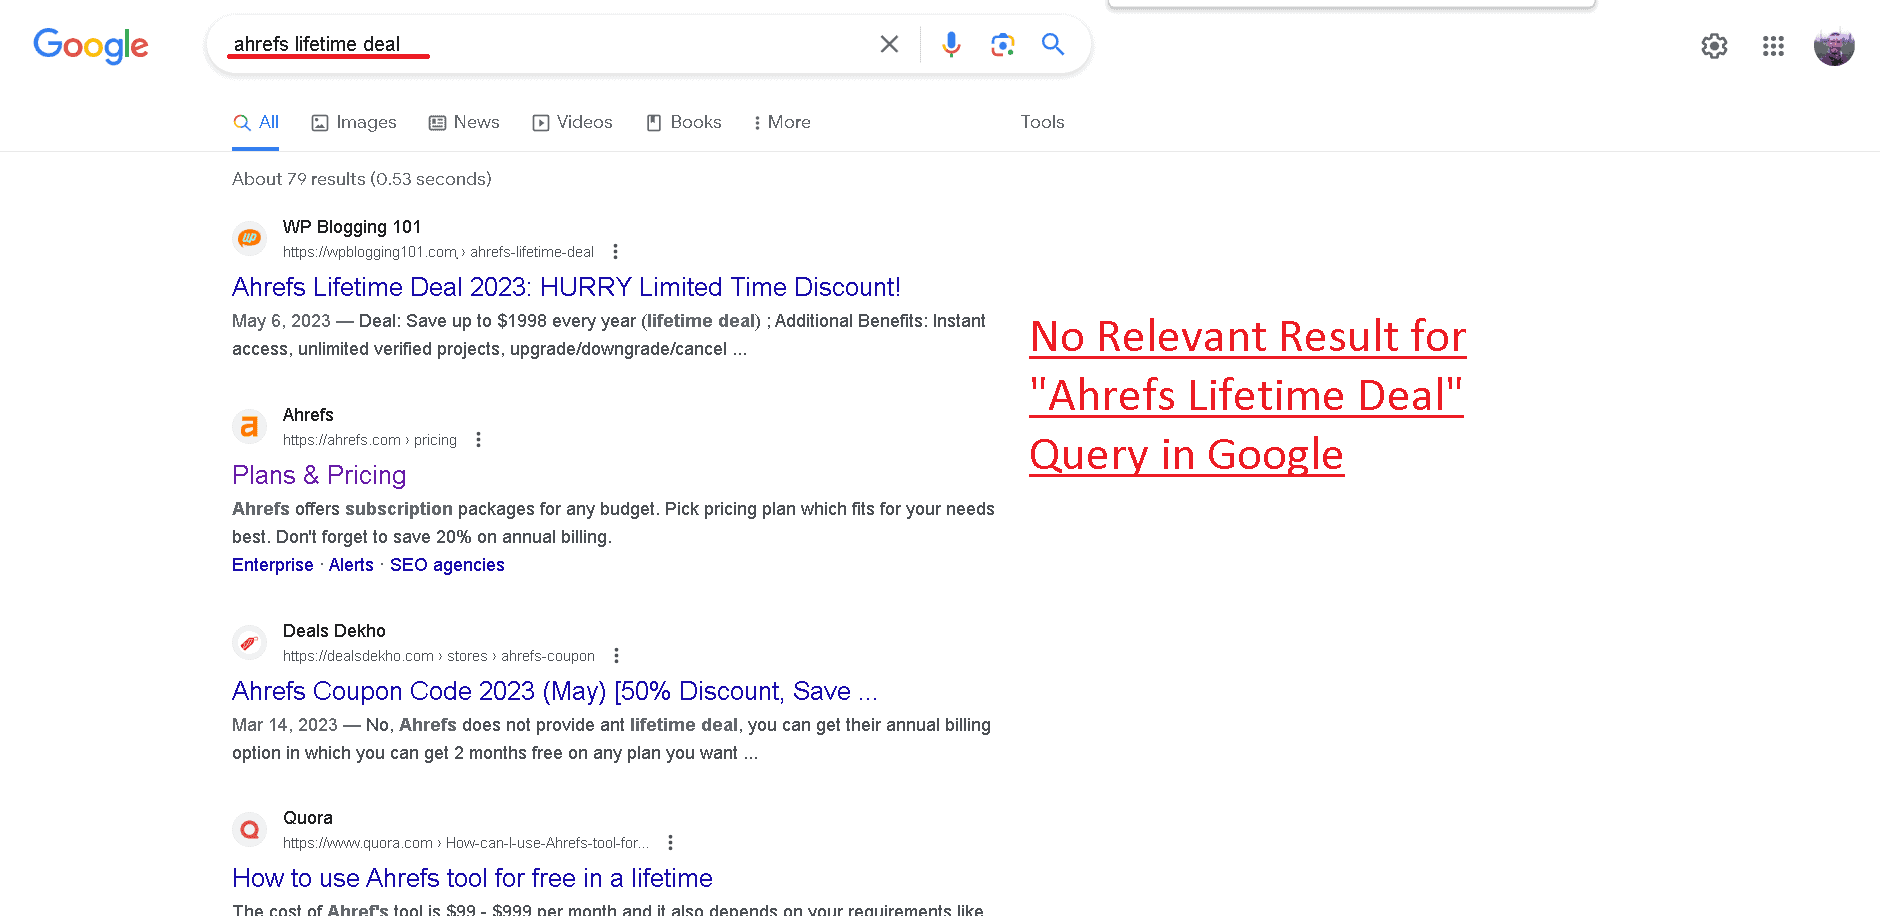 Google has no relevant results for the query "Ahrefs lifetime deal"